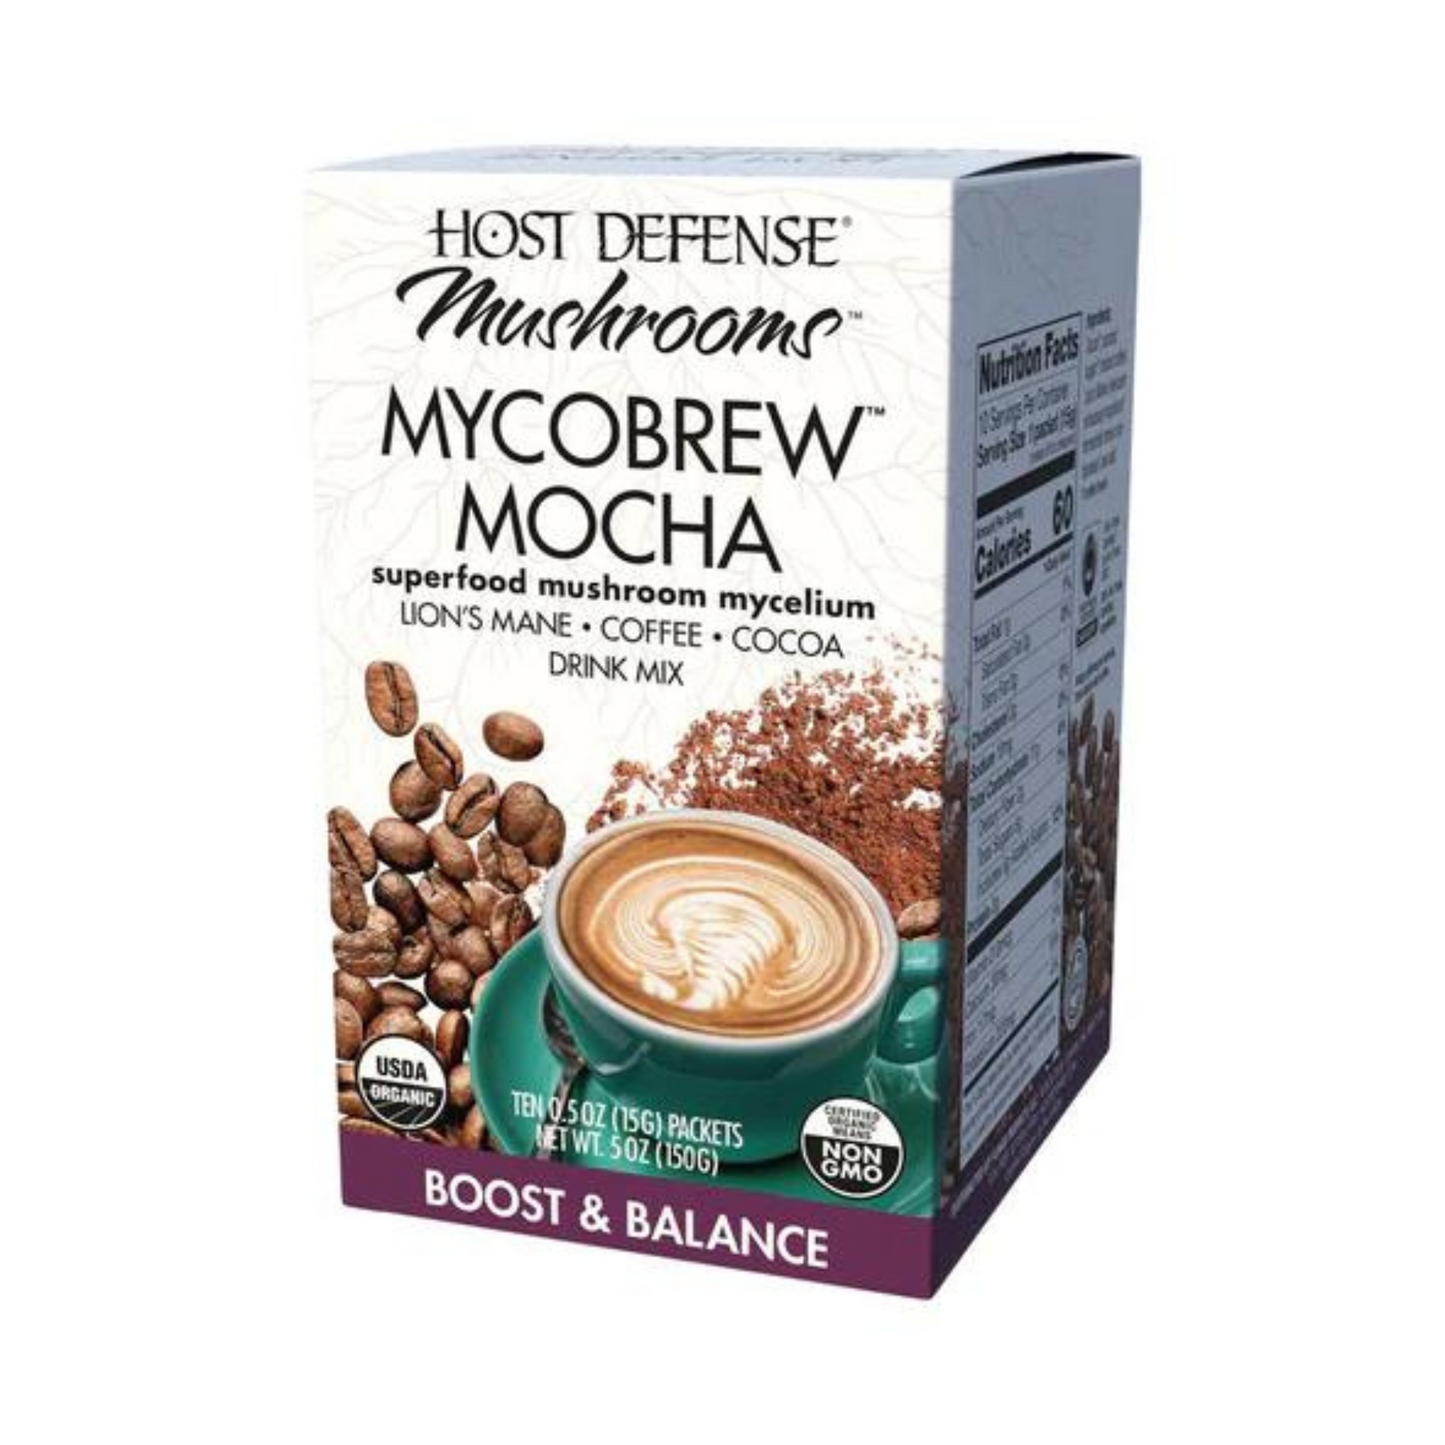 Primary Image of Host Defense MycoBrew Mocha Packets (10 count)